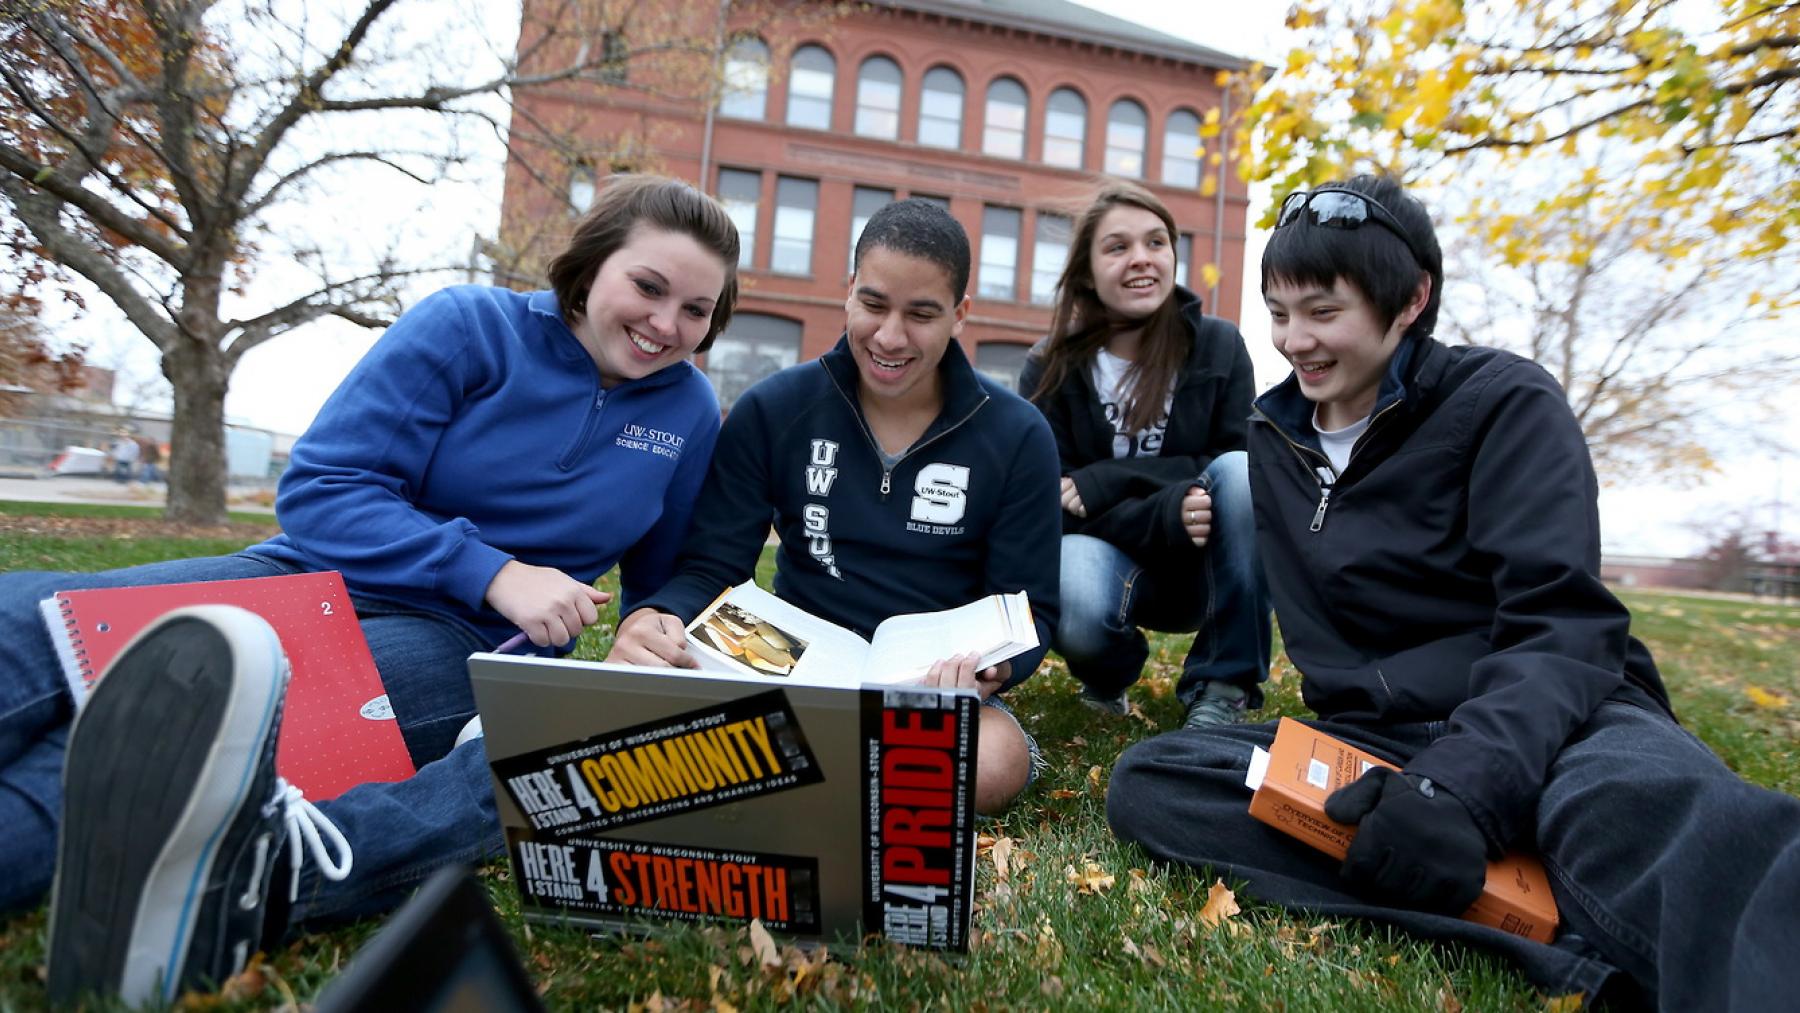 UW-Stout students lounge and study on the campus lawn.